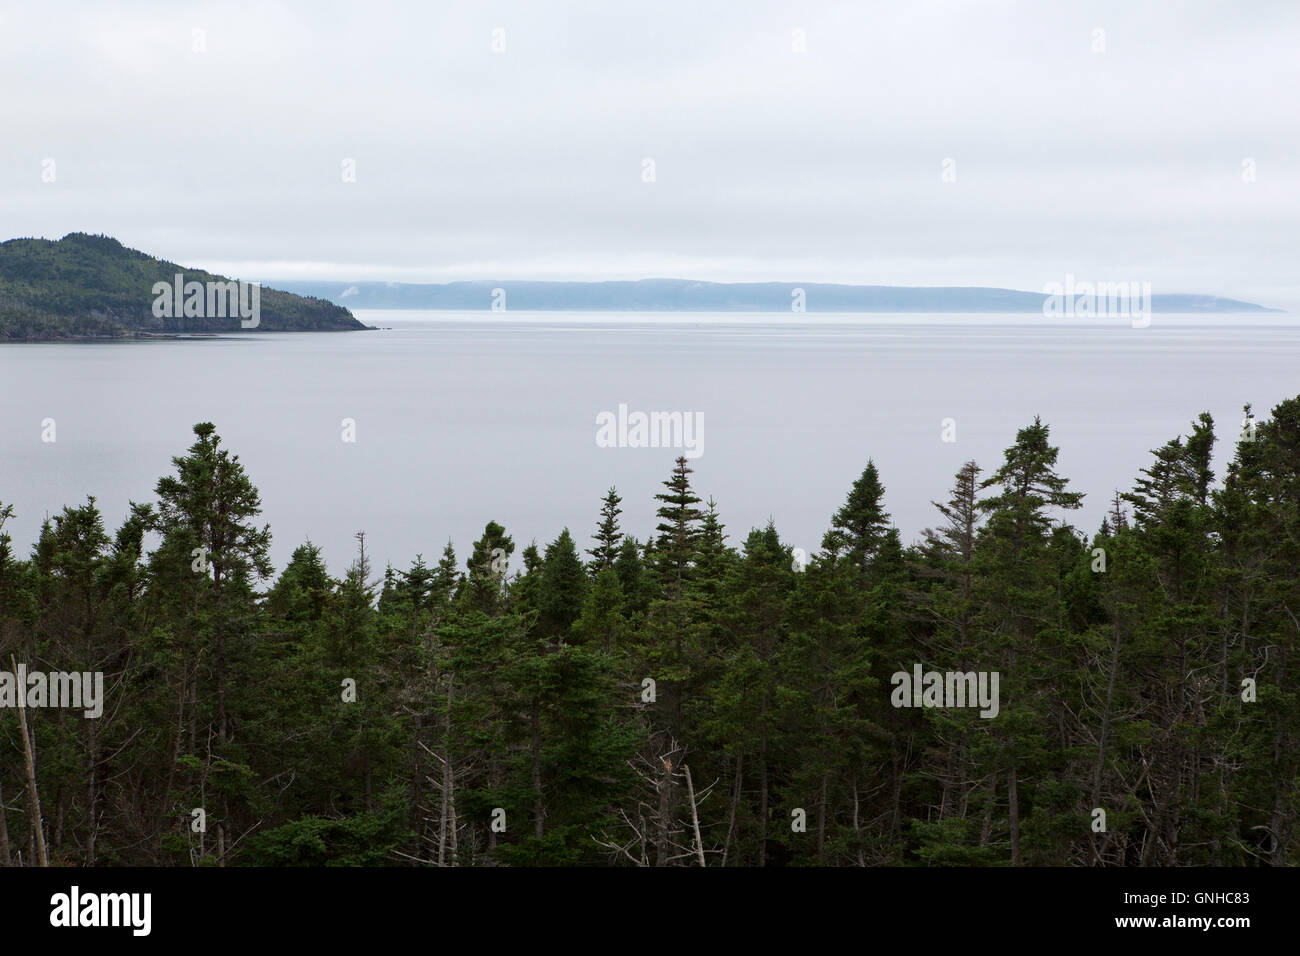 A view of the coastline and woodland from the Doctor's House Inn and Spa at Green's Harbour in Newfoundland and Labrador, Canada Stock Photo